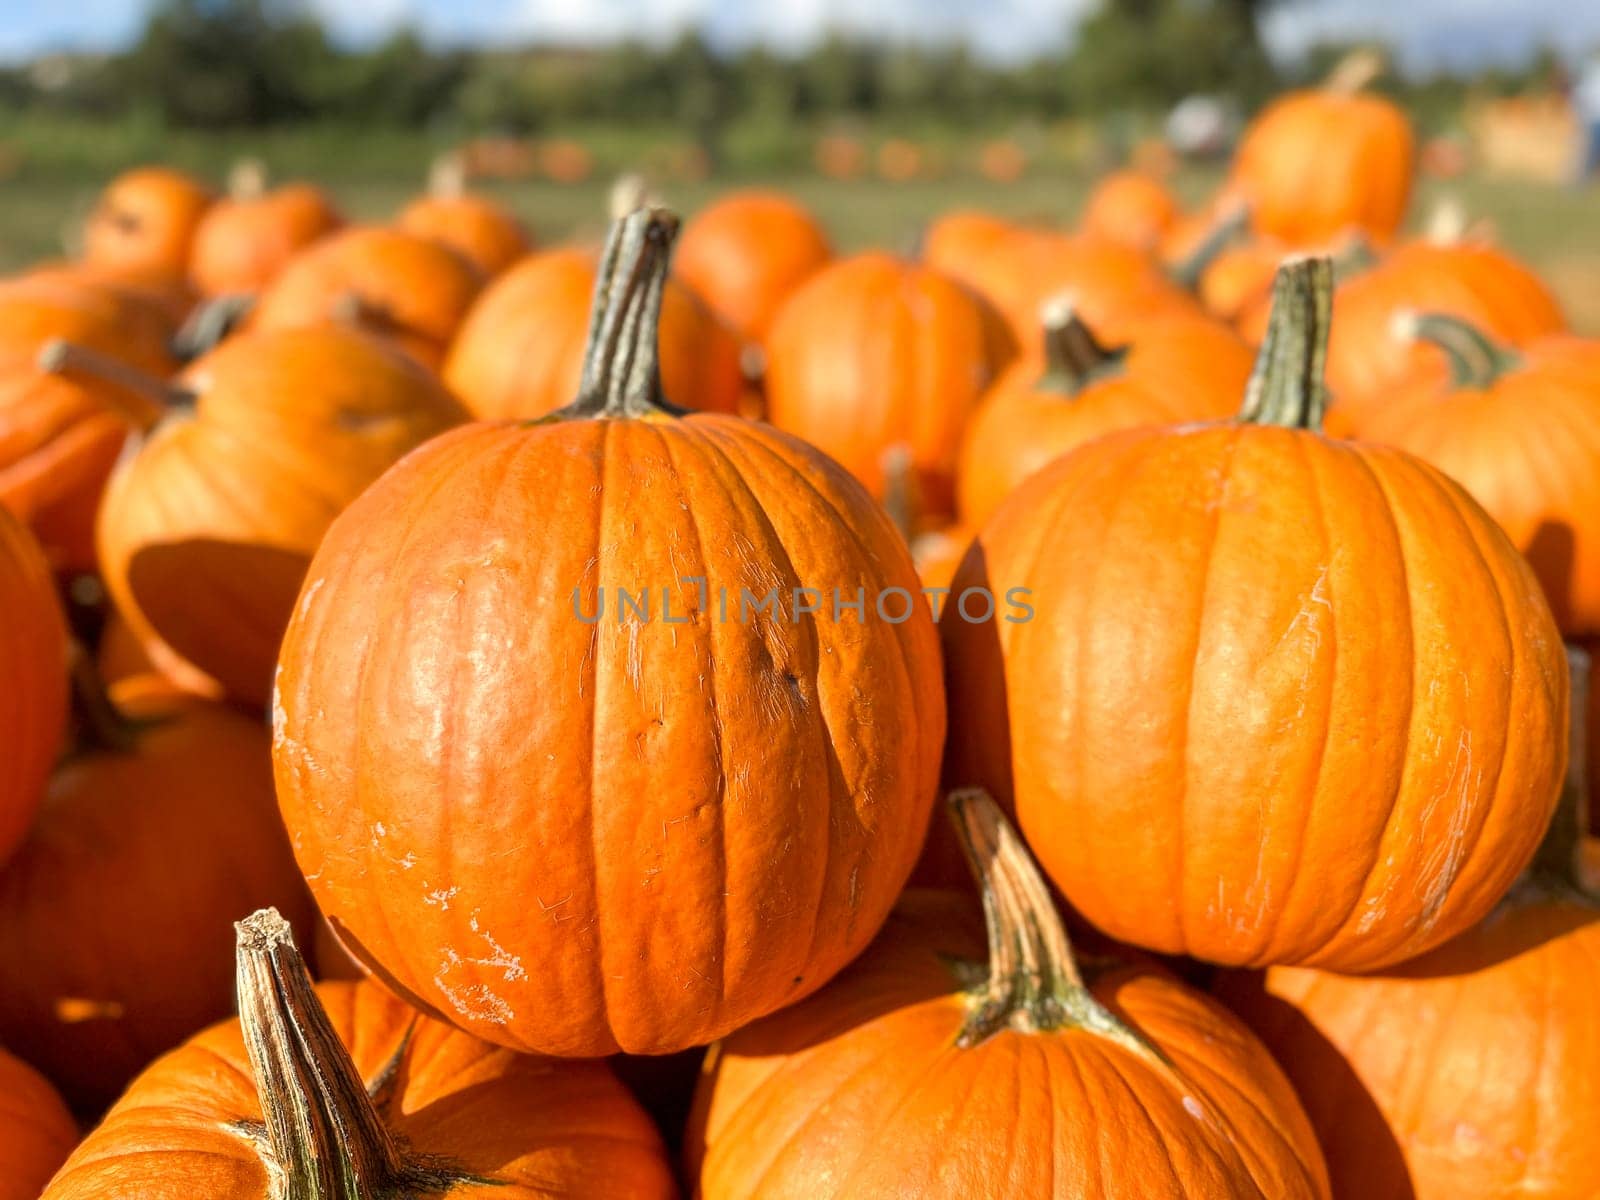 Pumpkins in the field during harvest time in fall. Halloween preparation by Bonandbon